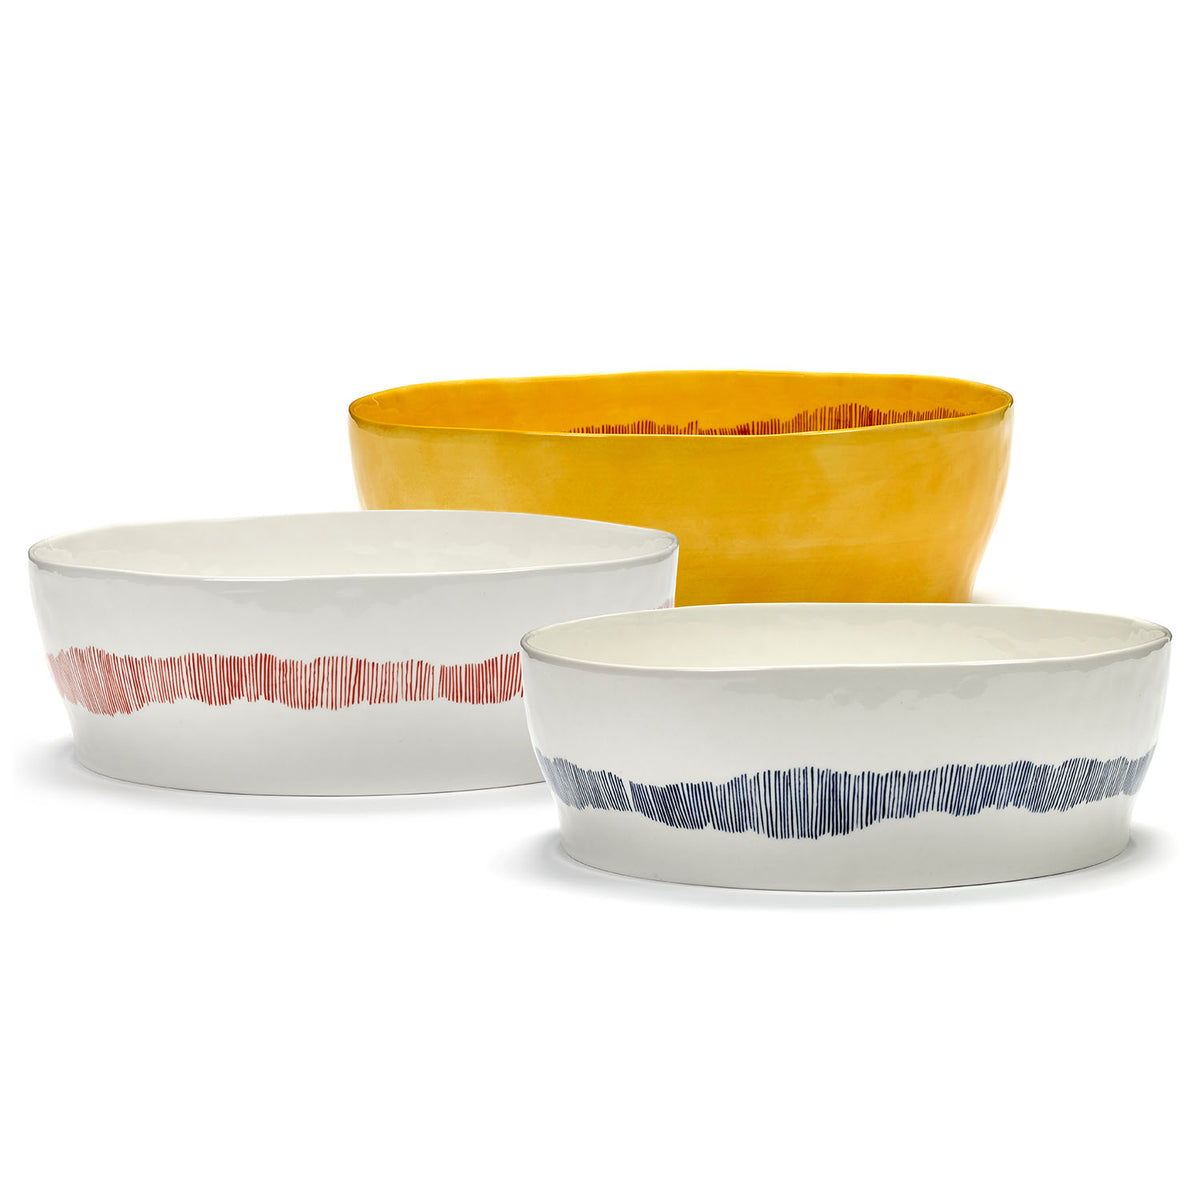 Ottolenghi for Serax Feast collection, group of salad bowls, with three designs available.